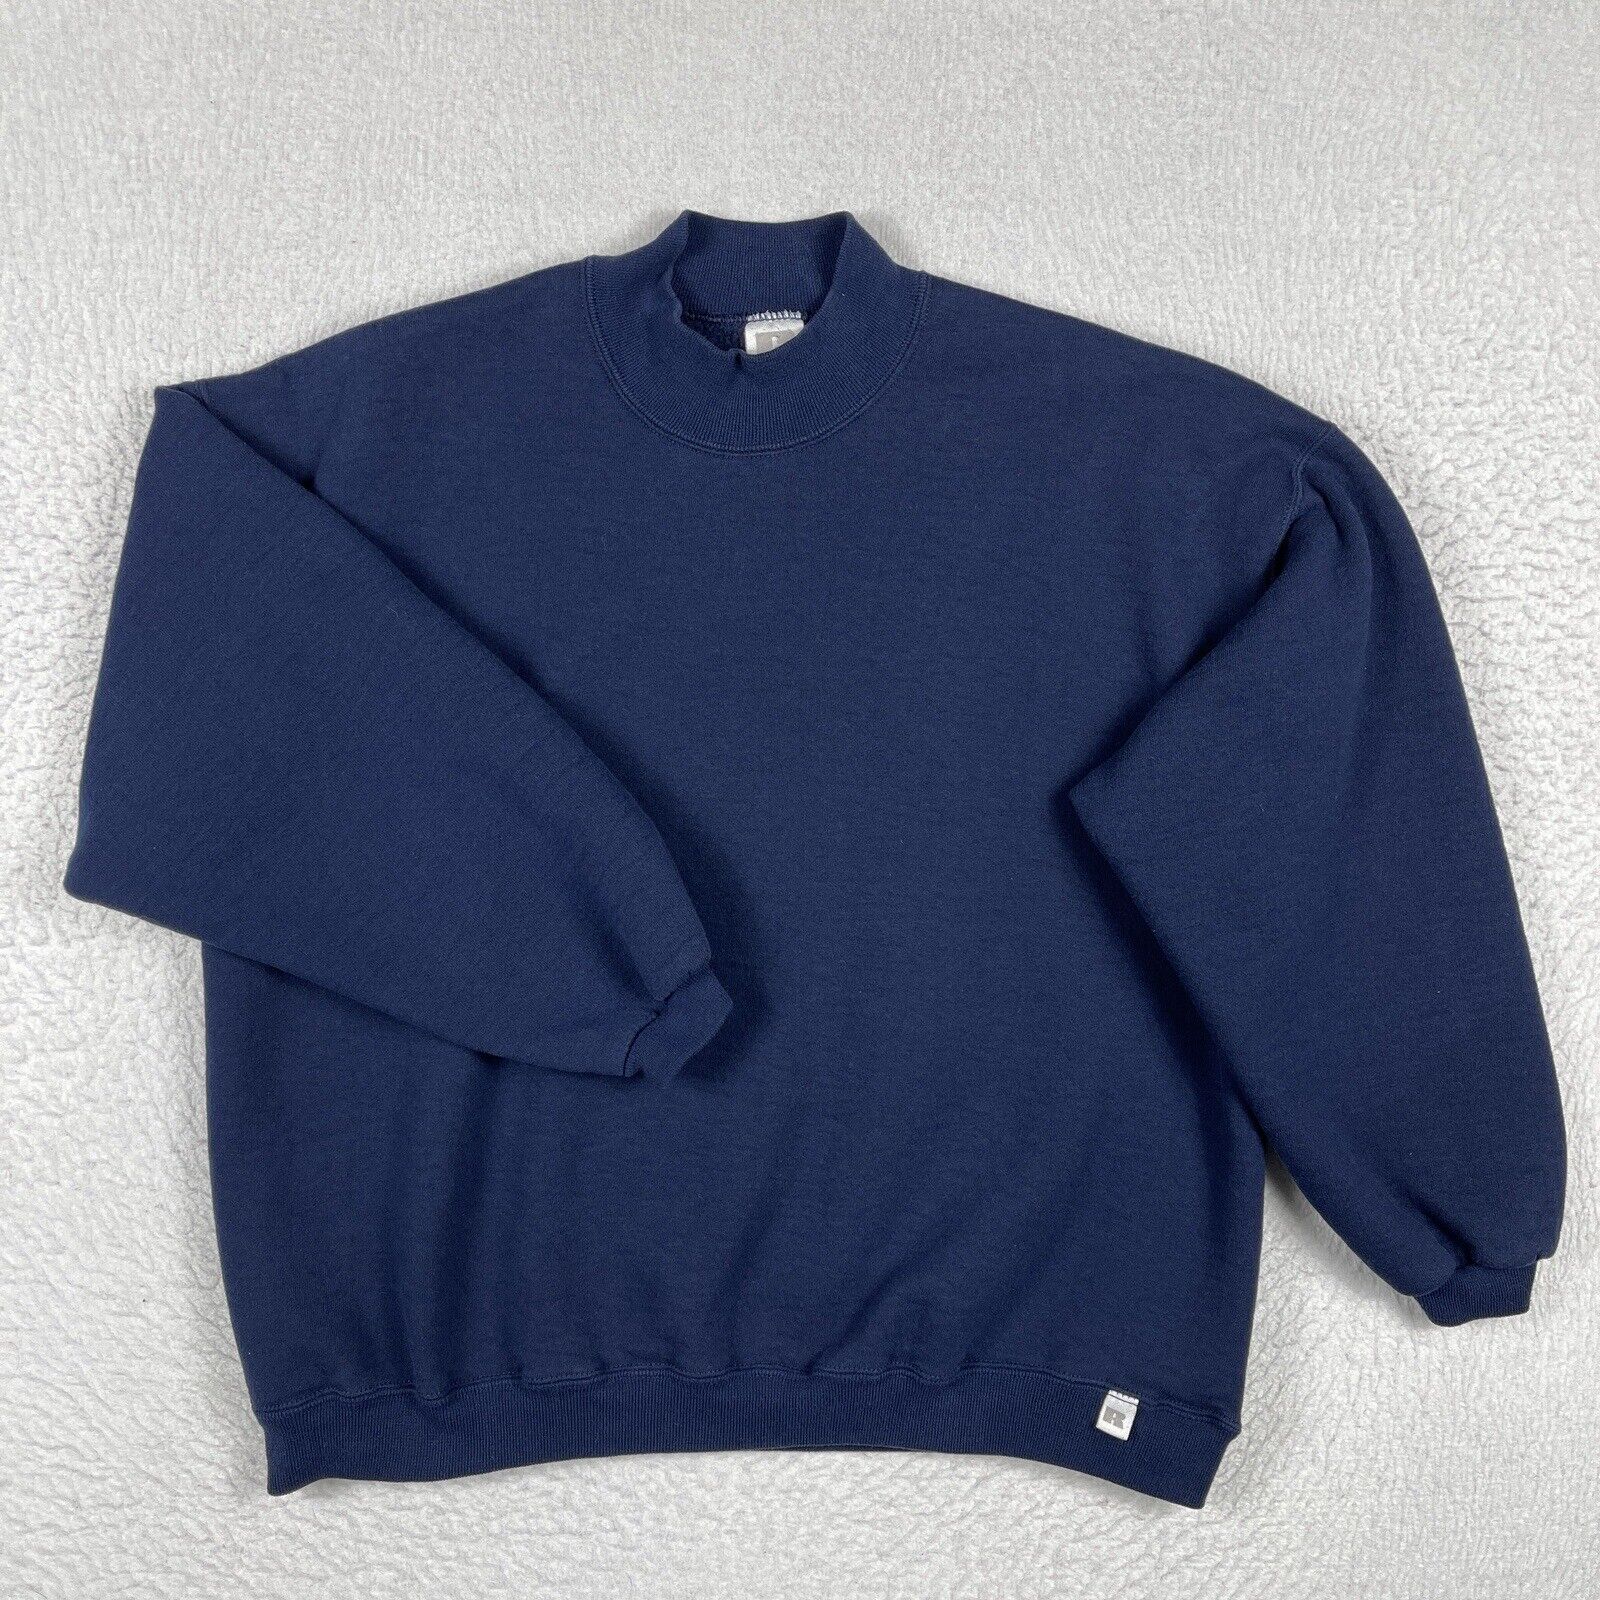 Russell Athletic Sweatshirt Mens XL Blue Mock Neck Vintage Made In USA Pullover